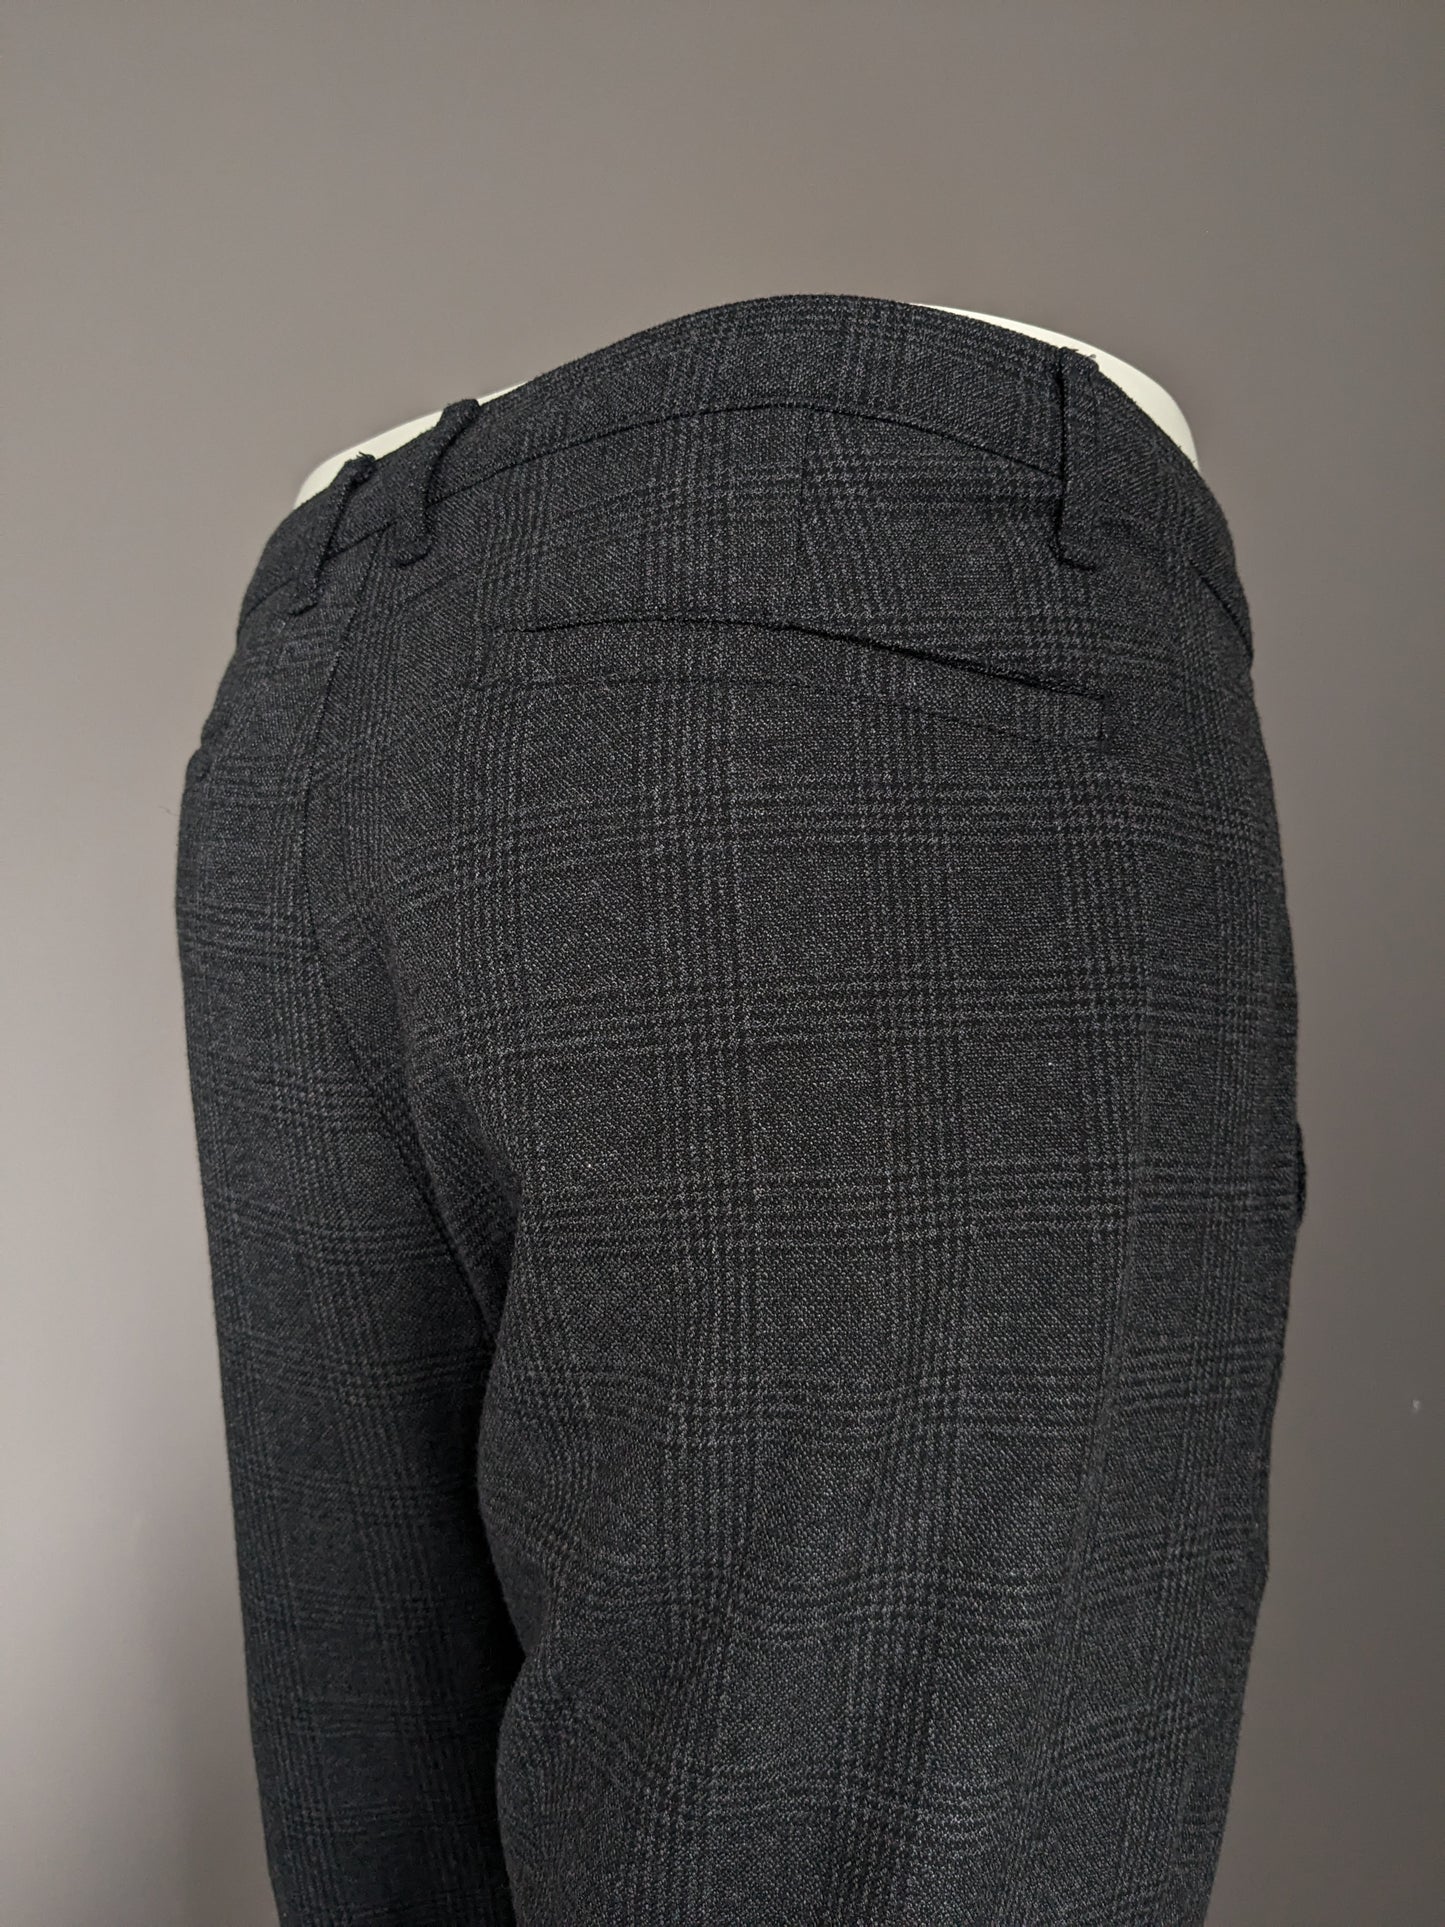 LCW Vision trousers / pants. Gray black checked. Cropped Slim Fit. W36 - L30.